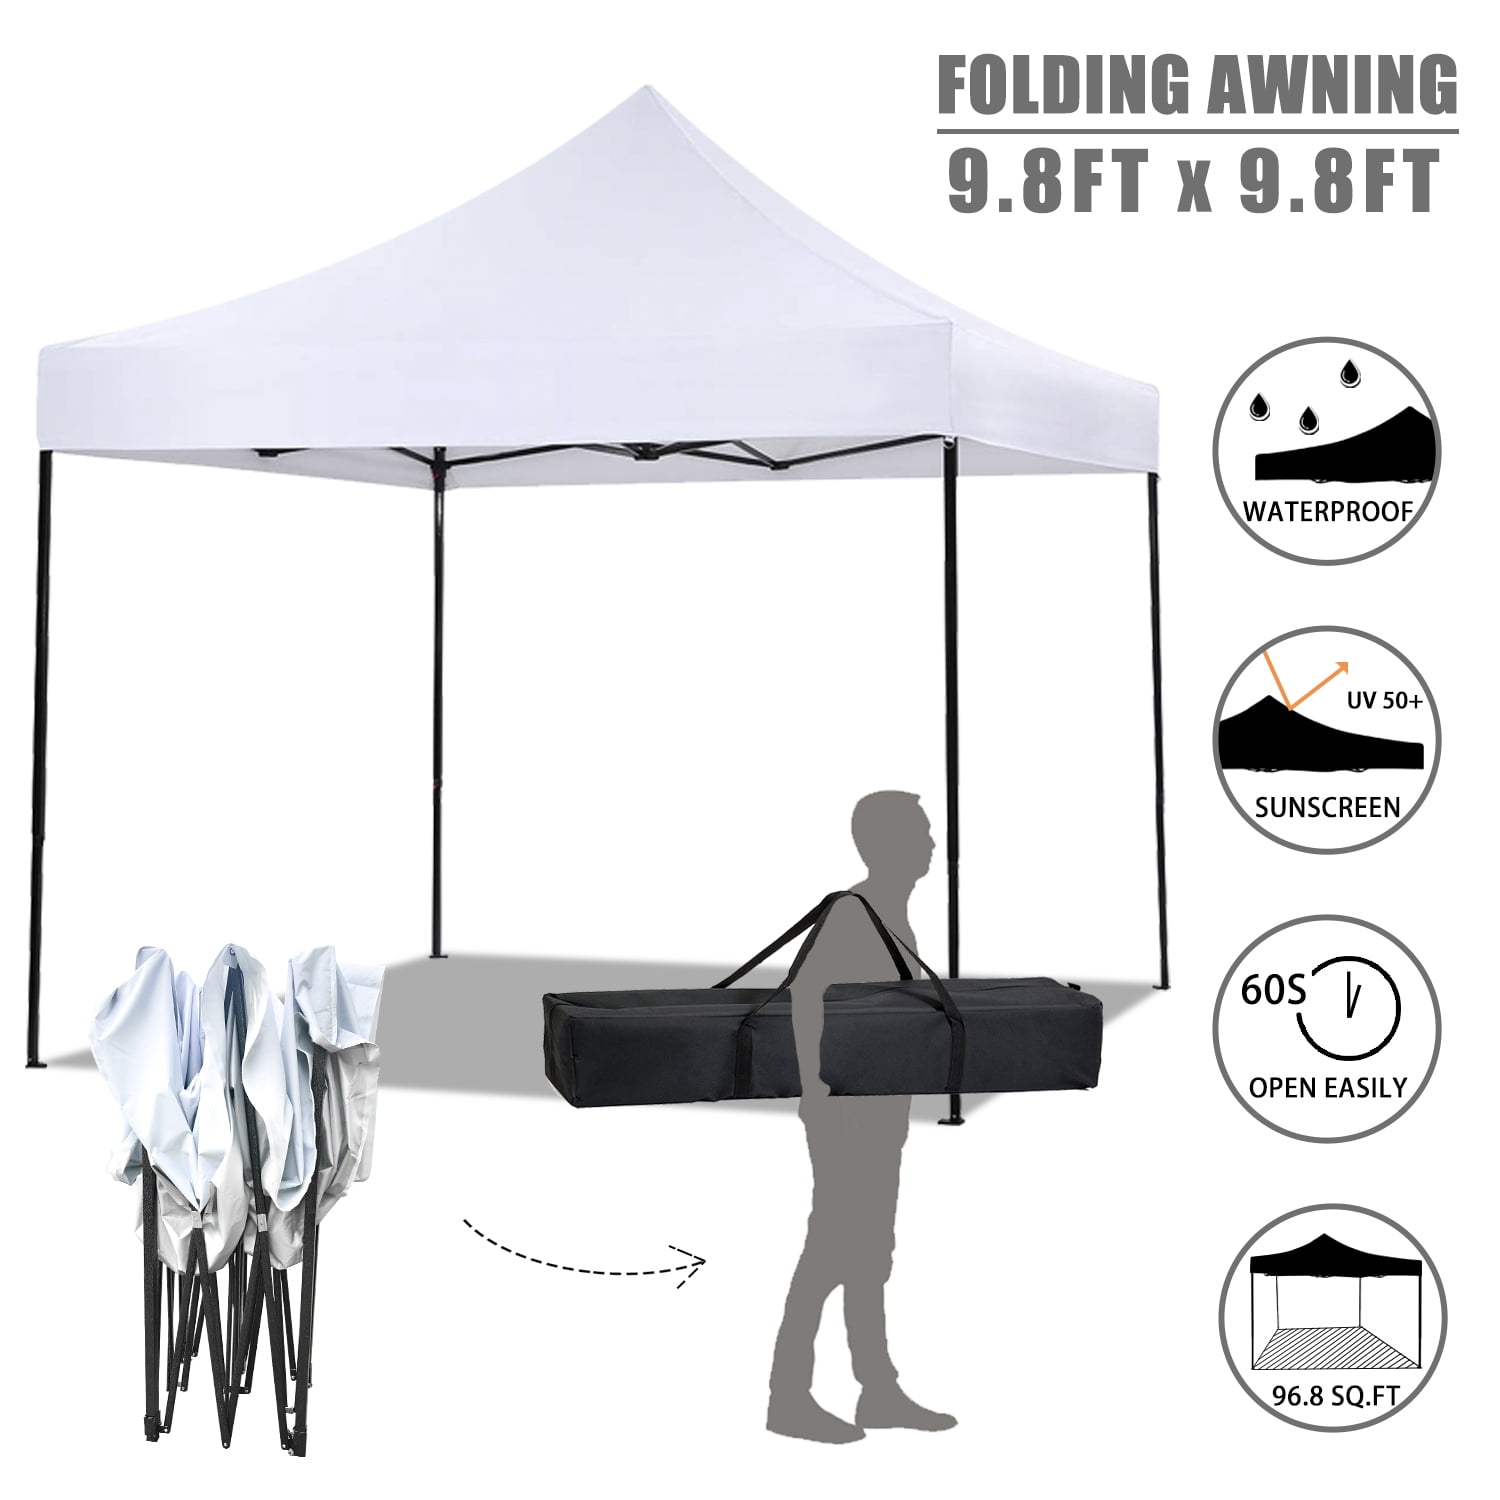 Pop Up Canopy 10x10 Pop Up Canopy Tent Party Tent Ez Up Canopy Sun Shade  Wedding Instant Folding Protable Better Air Circulation Outdoor Gazebo with  